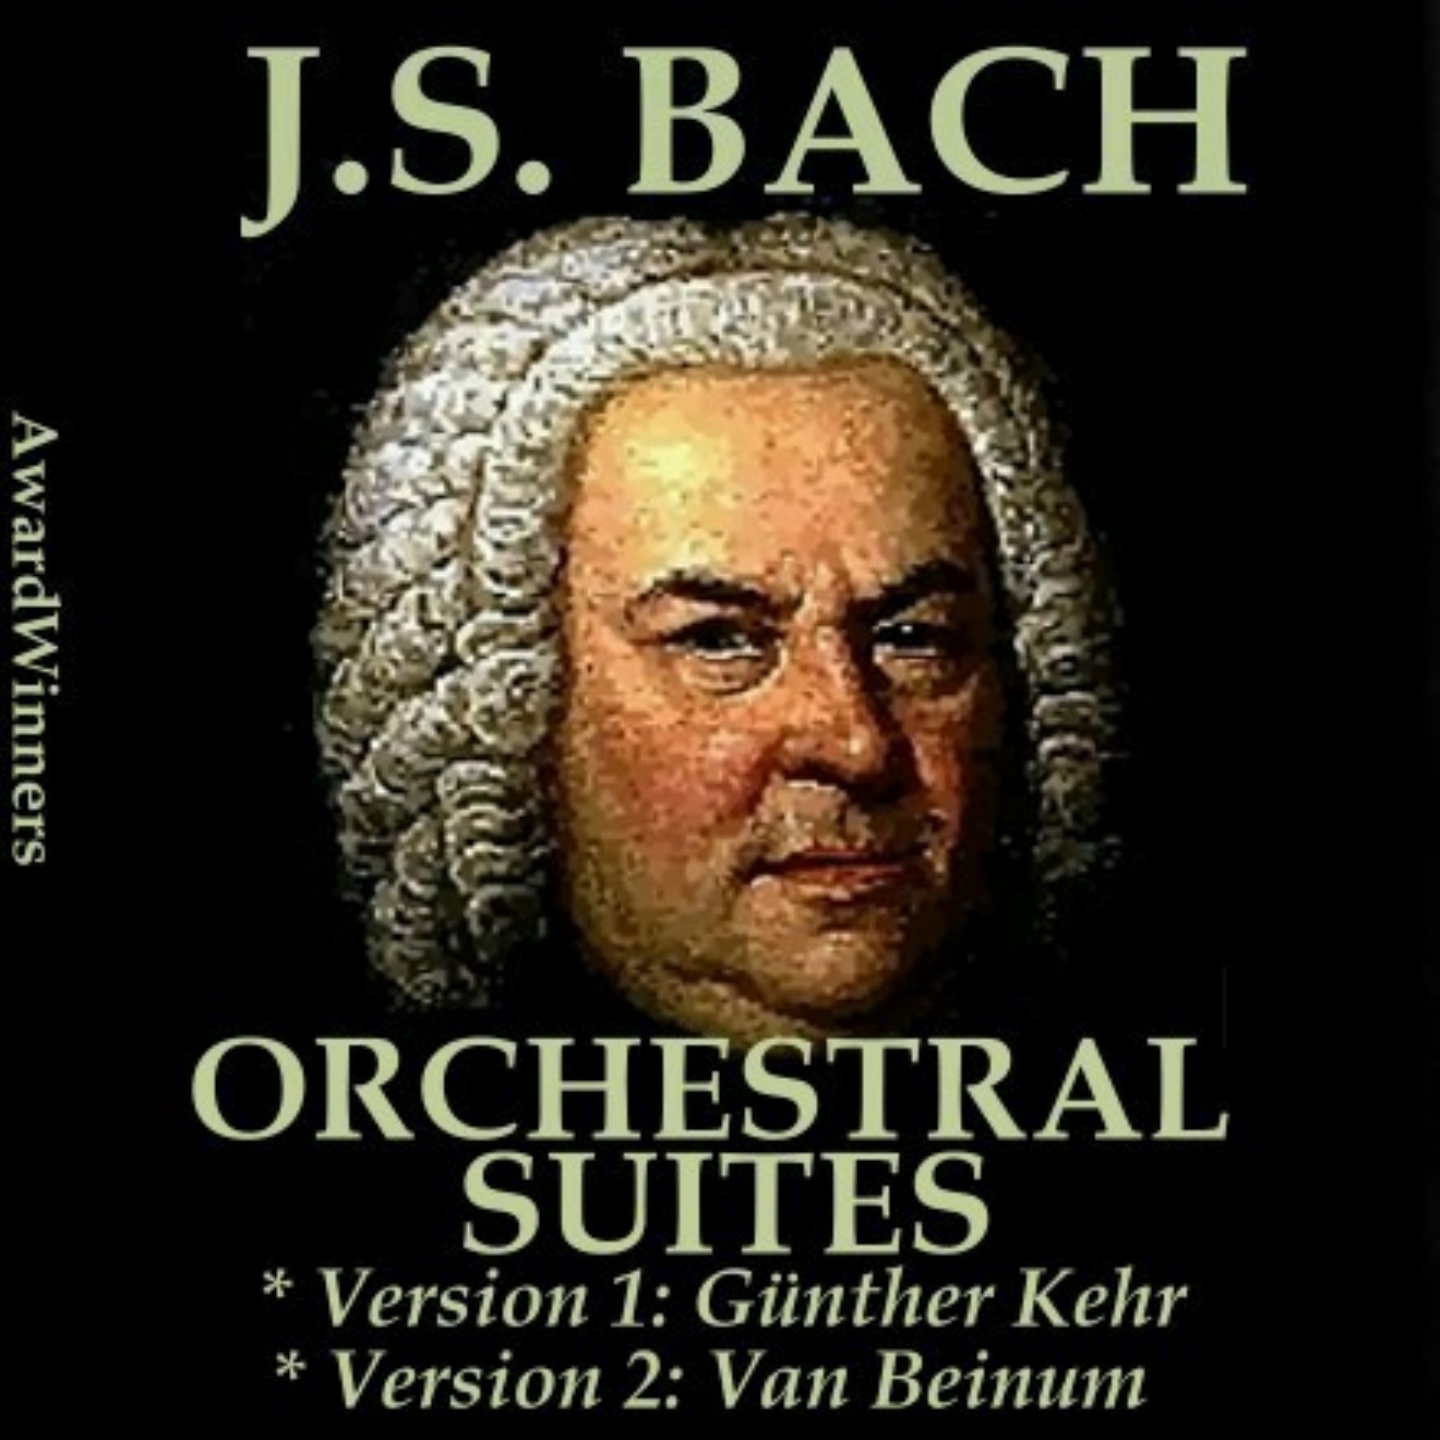 Suite - Overture No. 1 for Orchestra in C Major, BWV1066: I. Overture